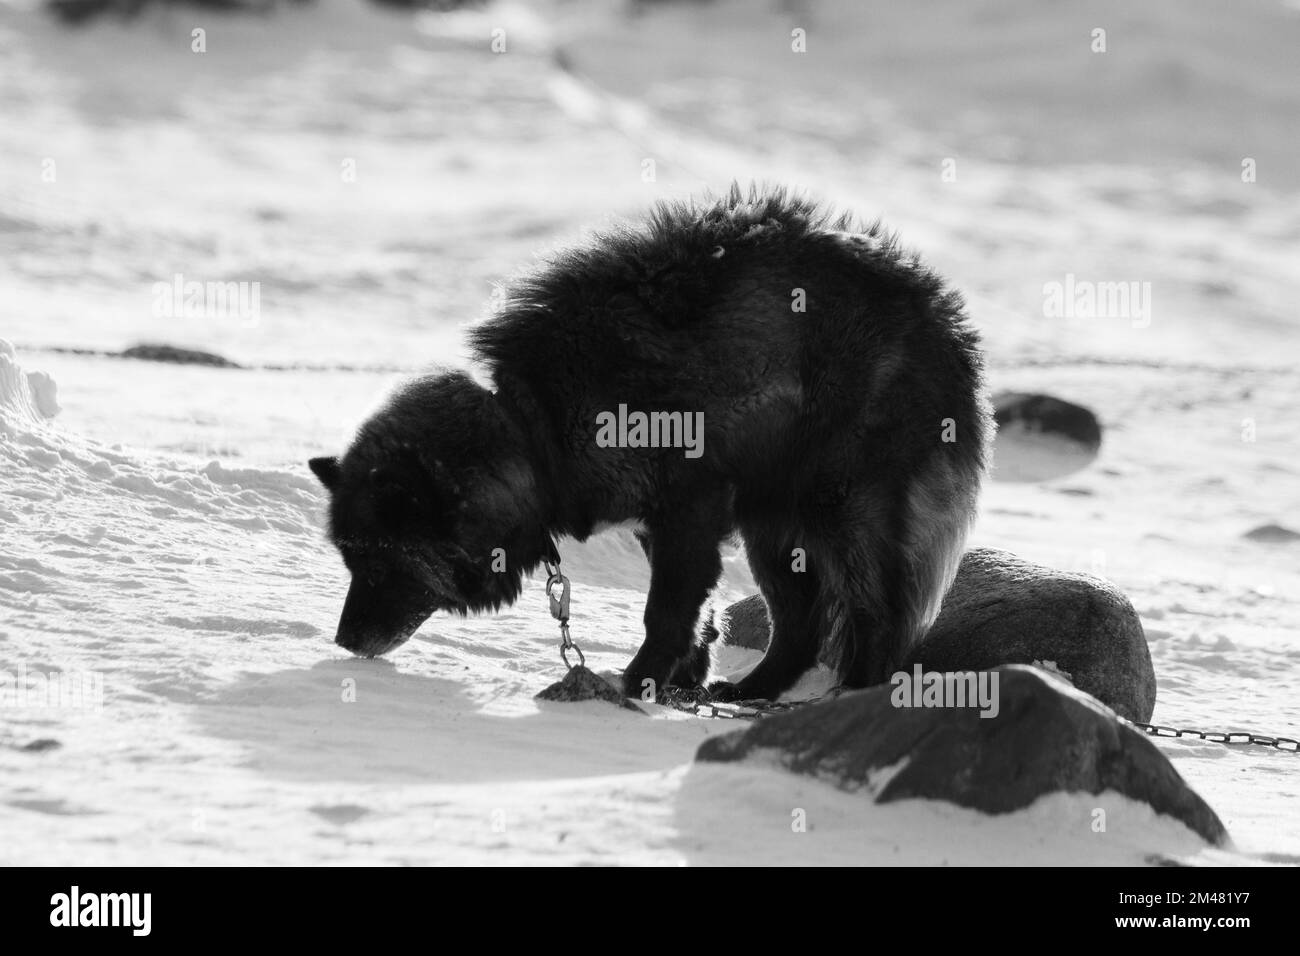 Black and white photo of a husky dog chained up snow in the background, near Hudson Bay, Churchill, Manitoba, Canada Stock Photo